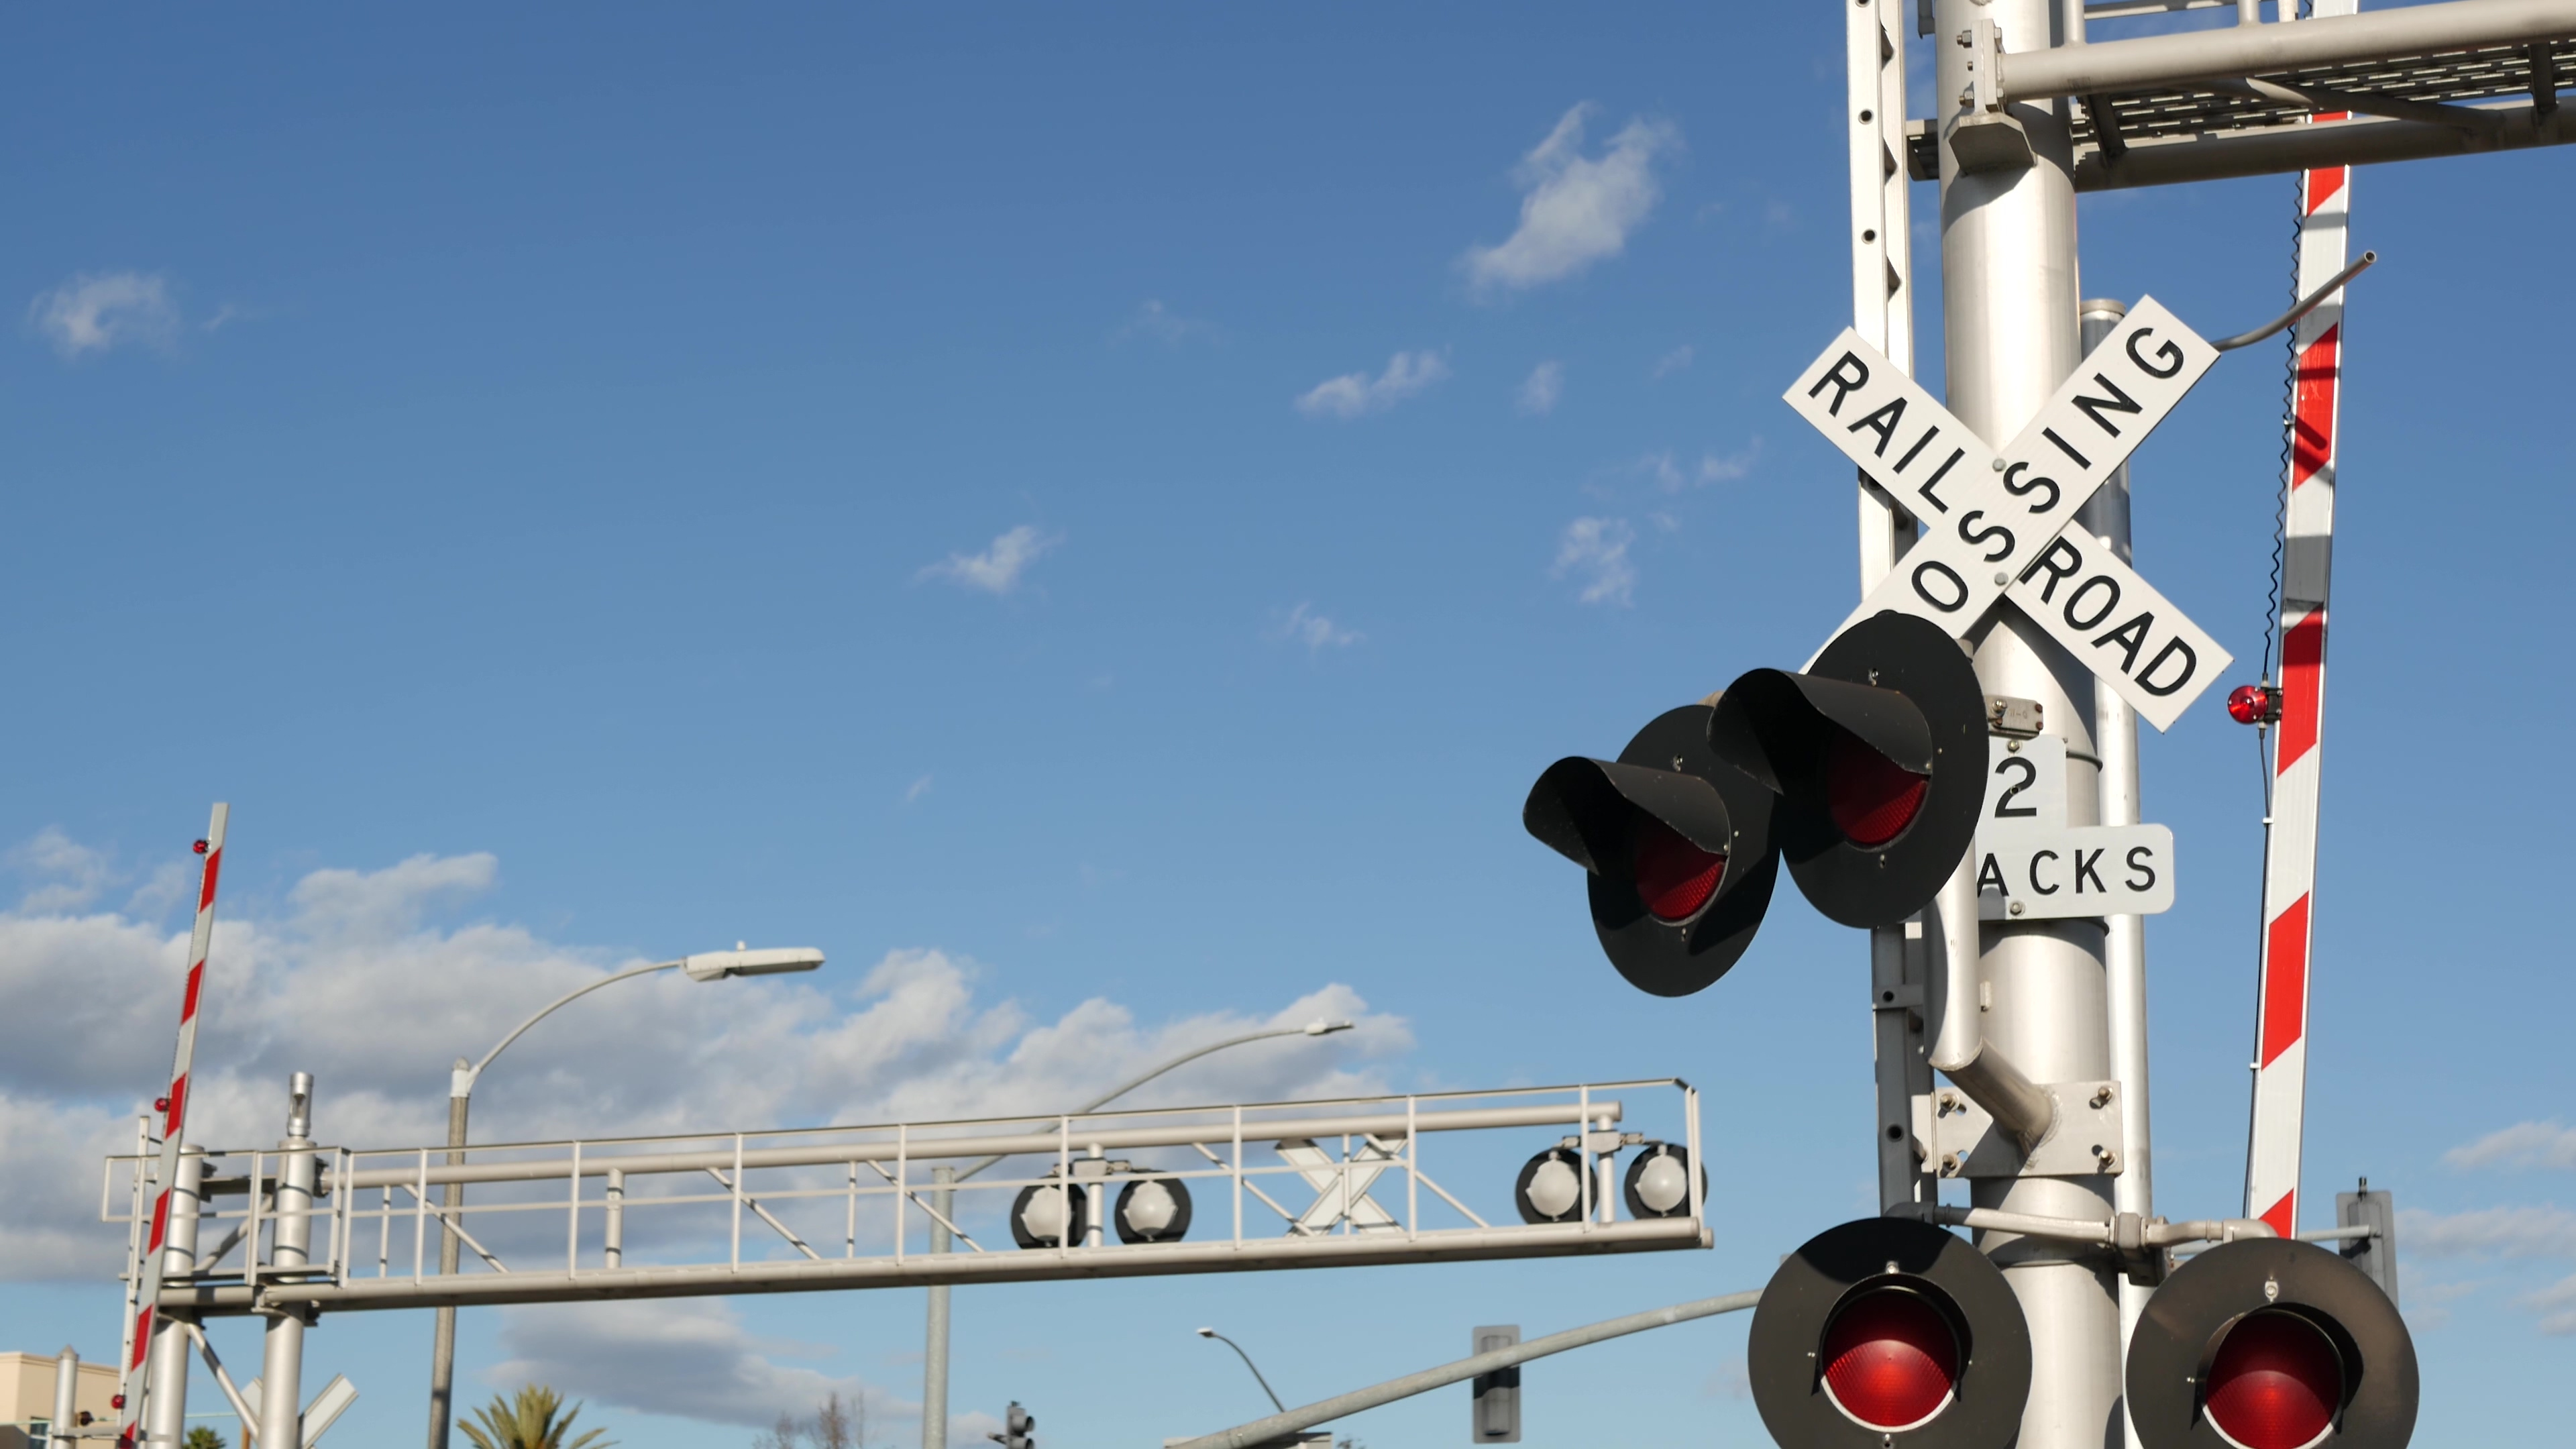 a train crossing lights and a sign